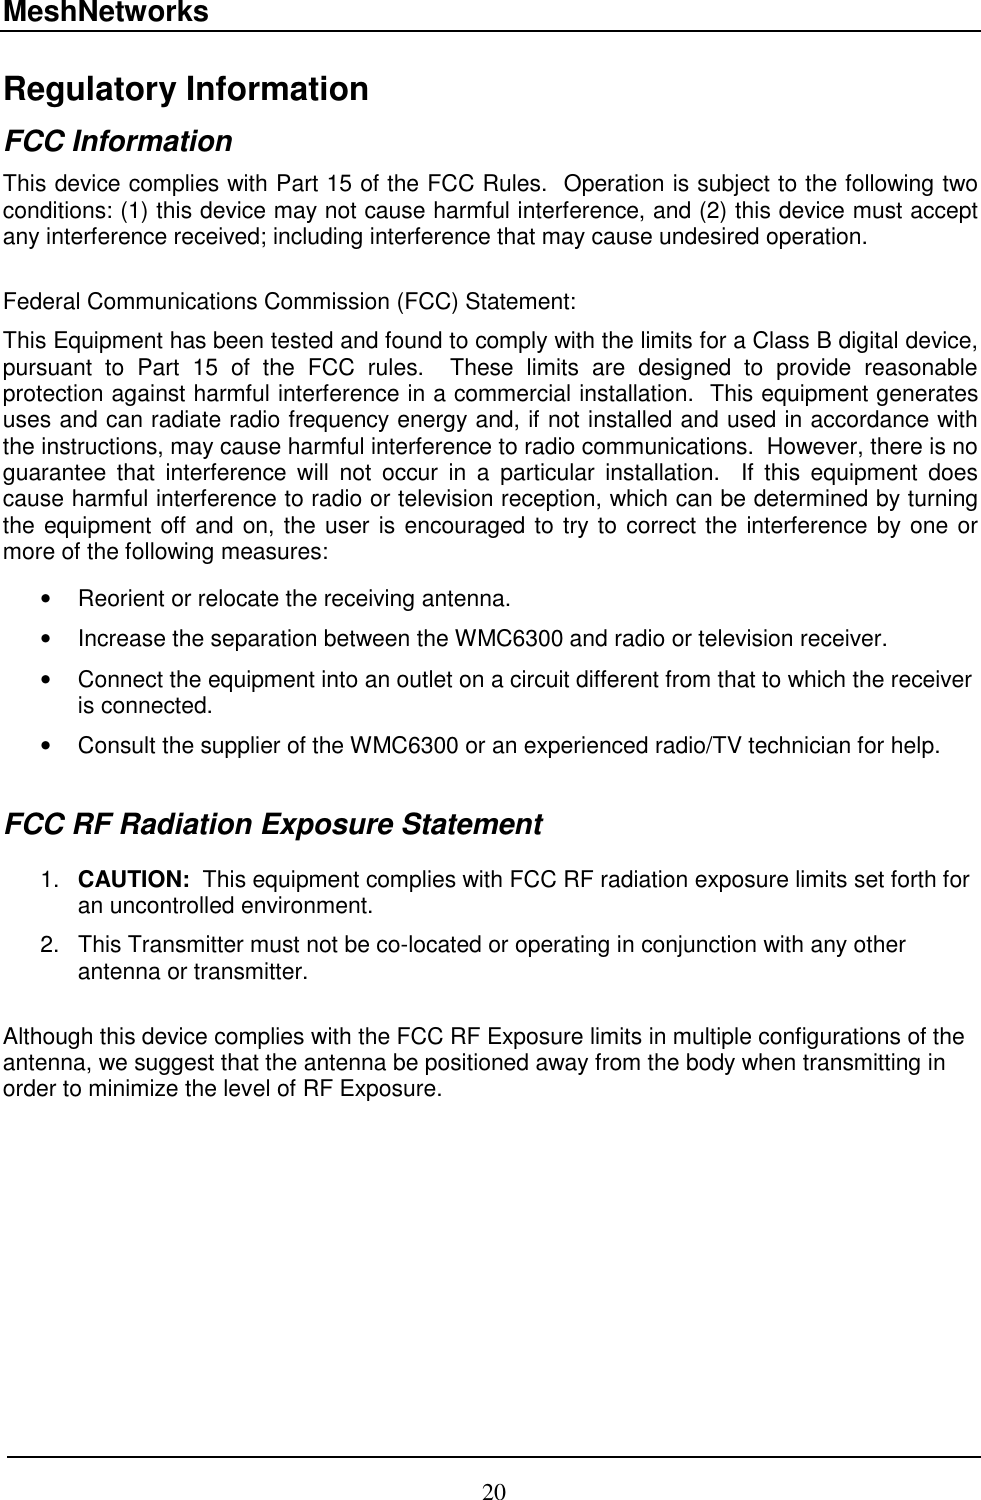 MeshNetworks 20 Regulatory Information FCC Information This device complies with Part 15 of the FCC Rules.  Operation is subject to the following two conditions: (1) this device may not cause harmful interference, and (2) this device must accept any interference received; including interference that may cause undesired operation.  Federal Communications Commission (FCC) Statement: This Equipment has been tested and found to comply with the limits for a Class B digital device, pursuant to Part 15 of the FCC rules.  These limits are designed to provide reasonable protection against harmful interference in a commercial installation.  This equipment generates uses and can radiate radio frequency energy and, if not installed and used in accordance with the instructions, may cause harmful interference to radio communications.  However, there is no guarantee that interference will not occur in a particular installation.  If this equipment does cause harmful interference to radio or television reception, which can be determined by turning the equipment off and on, the user is encouraged to try to correct the interference by one or more of the following measures:  •  Reorient or relocate the receiving antenna. •  Increase the separation between the WMC6300 and radio or television receiver. •  Connect the equipment into an outlet on a circuit different from that to which the receiver is connected.  •  Consult the supplier of the WMC6300 or an experienced radio/TV technician for help.  FCC RF Radiation Exposure Statement  1.  CAUTION:  This equipment complies with FCC RF radiation exposure limits set forth for an uncontrolled environment. 2.  This Transmitter must not be co-located or operating in conjunction with any other antenna or transmitter.  Although this device complies with the FCC RF Exposure limits in multiple configurations of the antenna, we suggest that the antenna be positioned away from the body when transmitting in order to minimize the level of RF Exposure.    